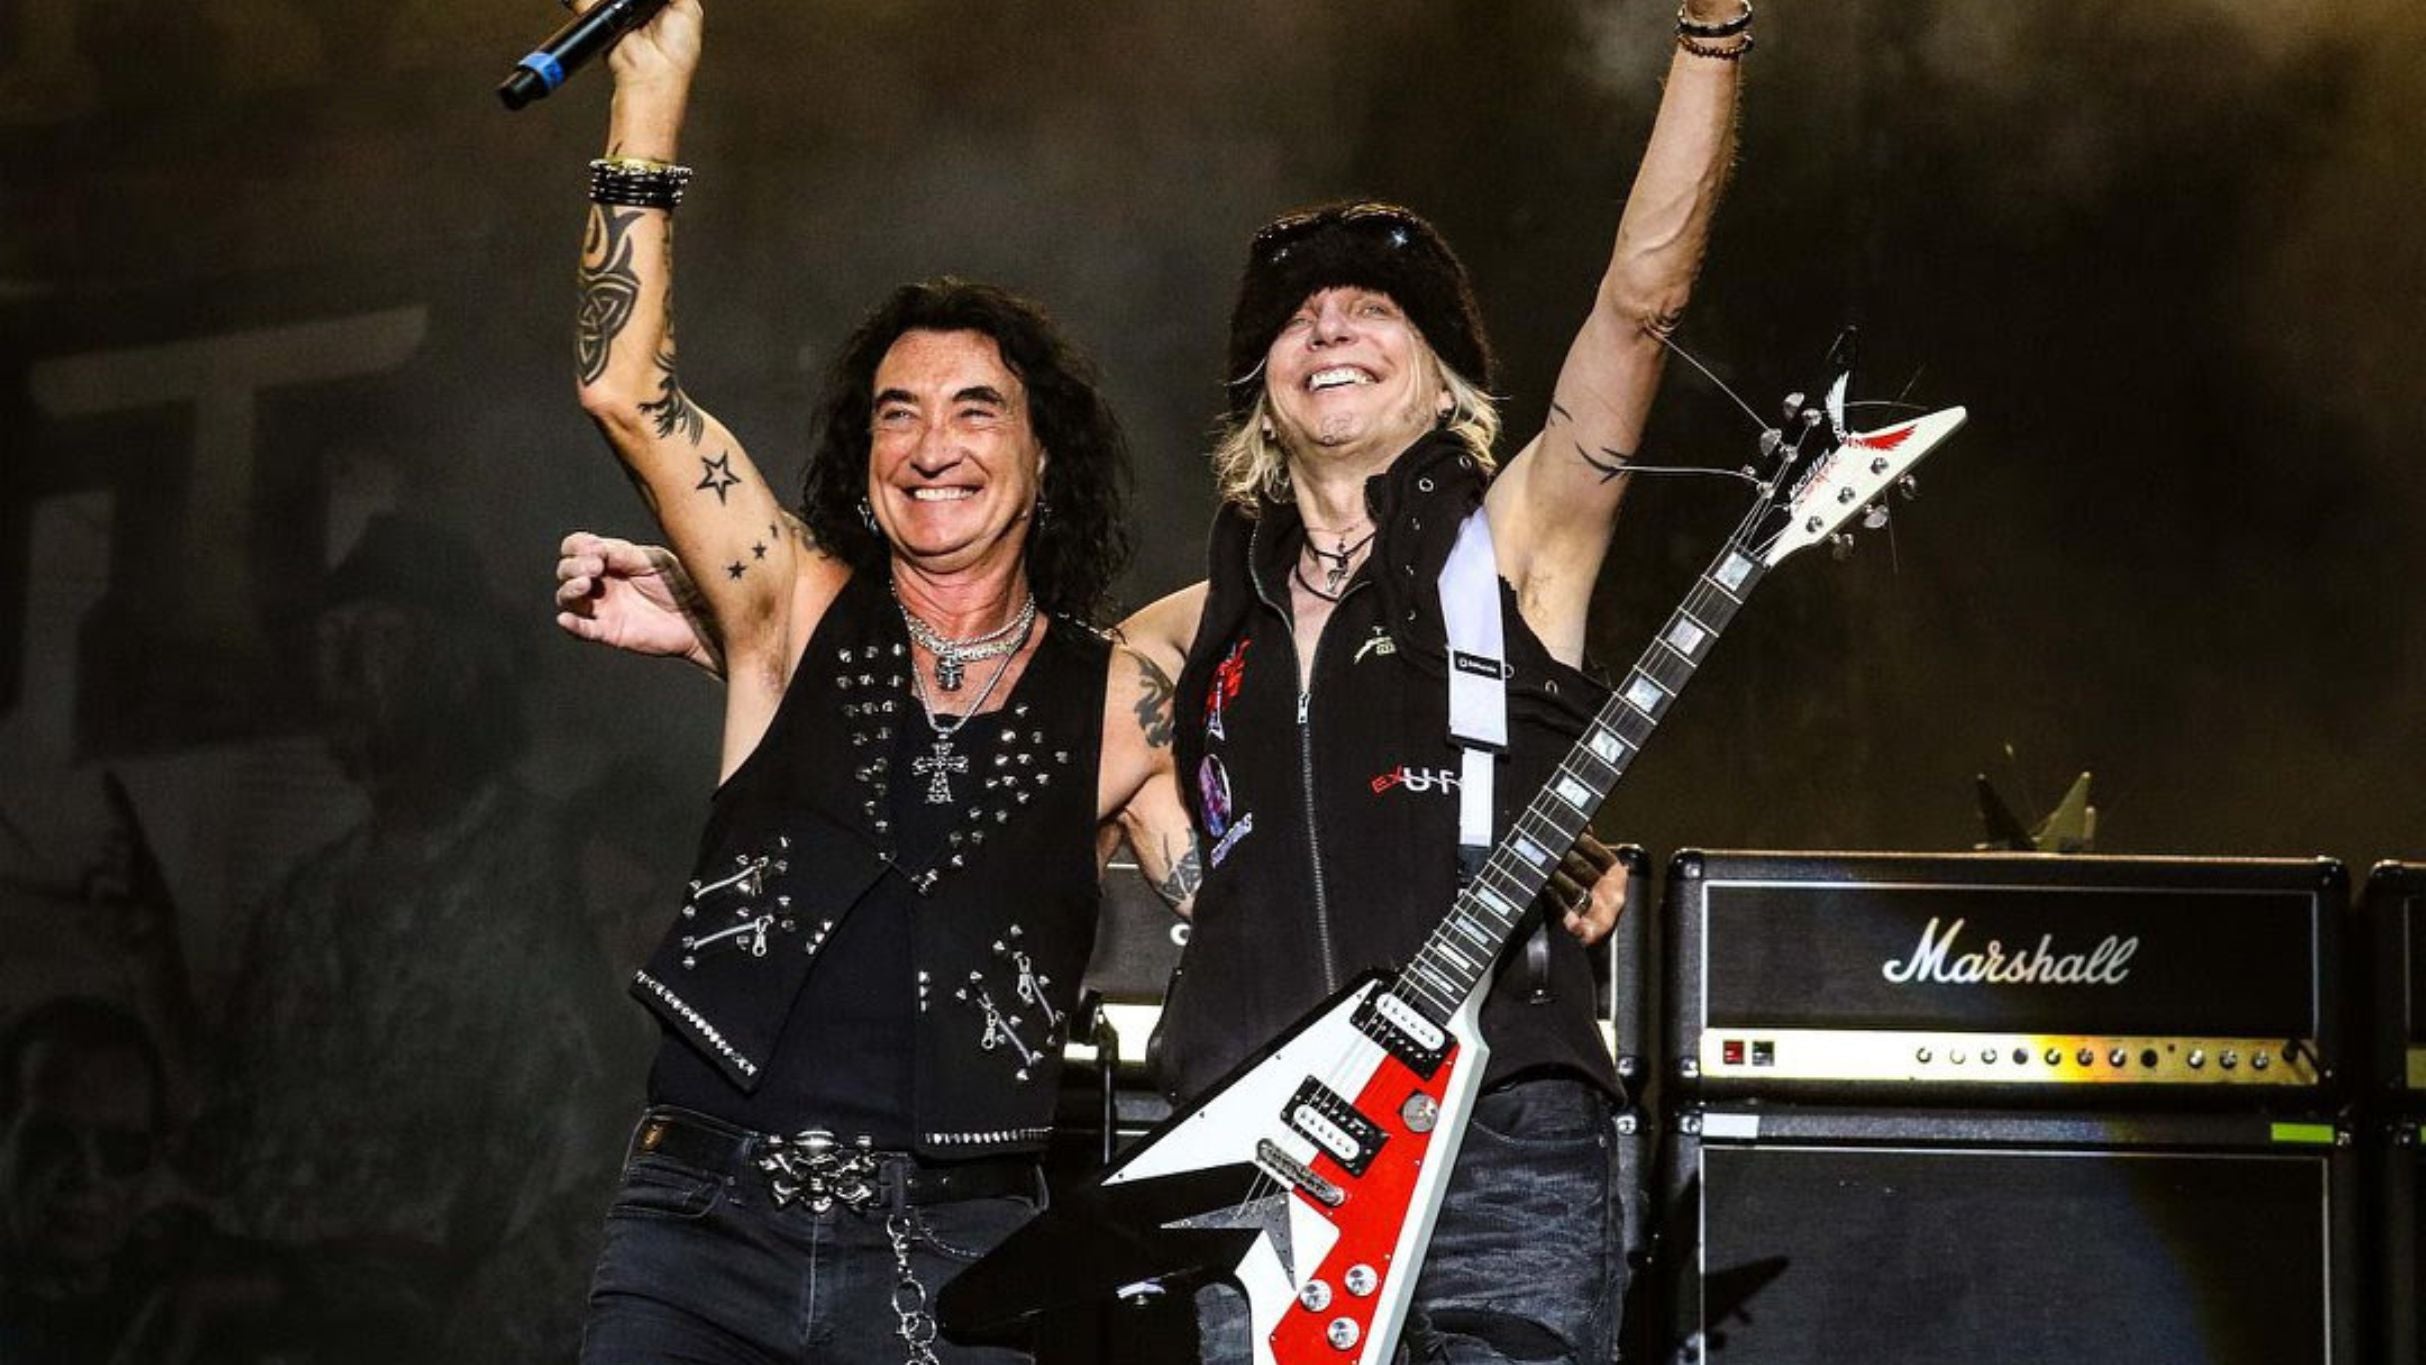 Image used with permission from Ticketmaster | Michael Schenker / MSG - 50TH ANNIVERSARY UNIVERSAL WORLD TOUR tickets